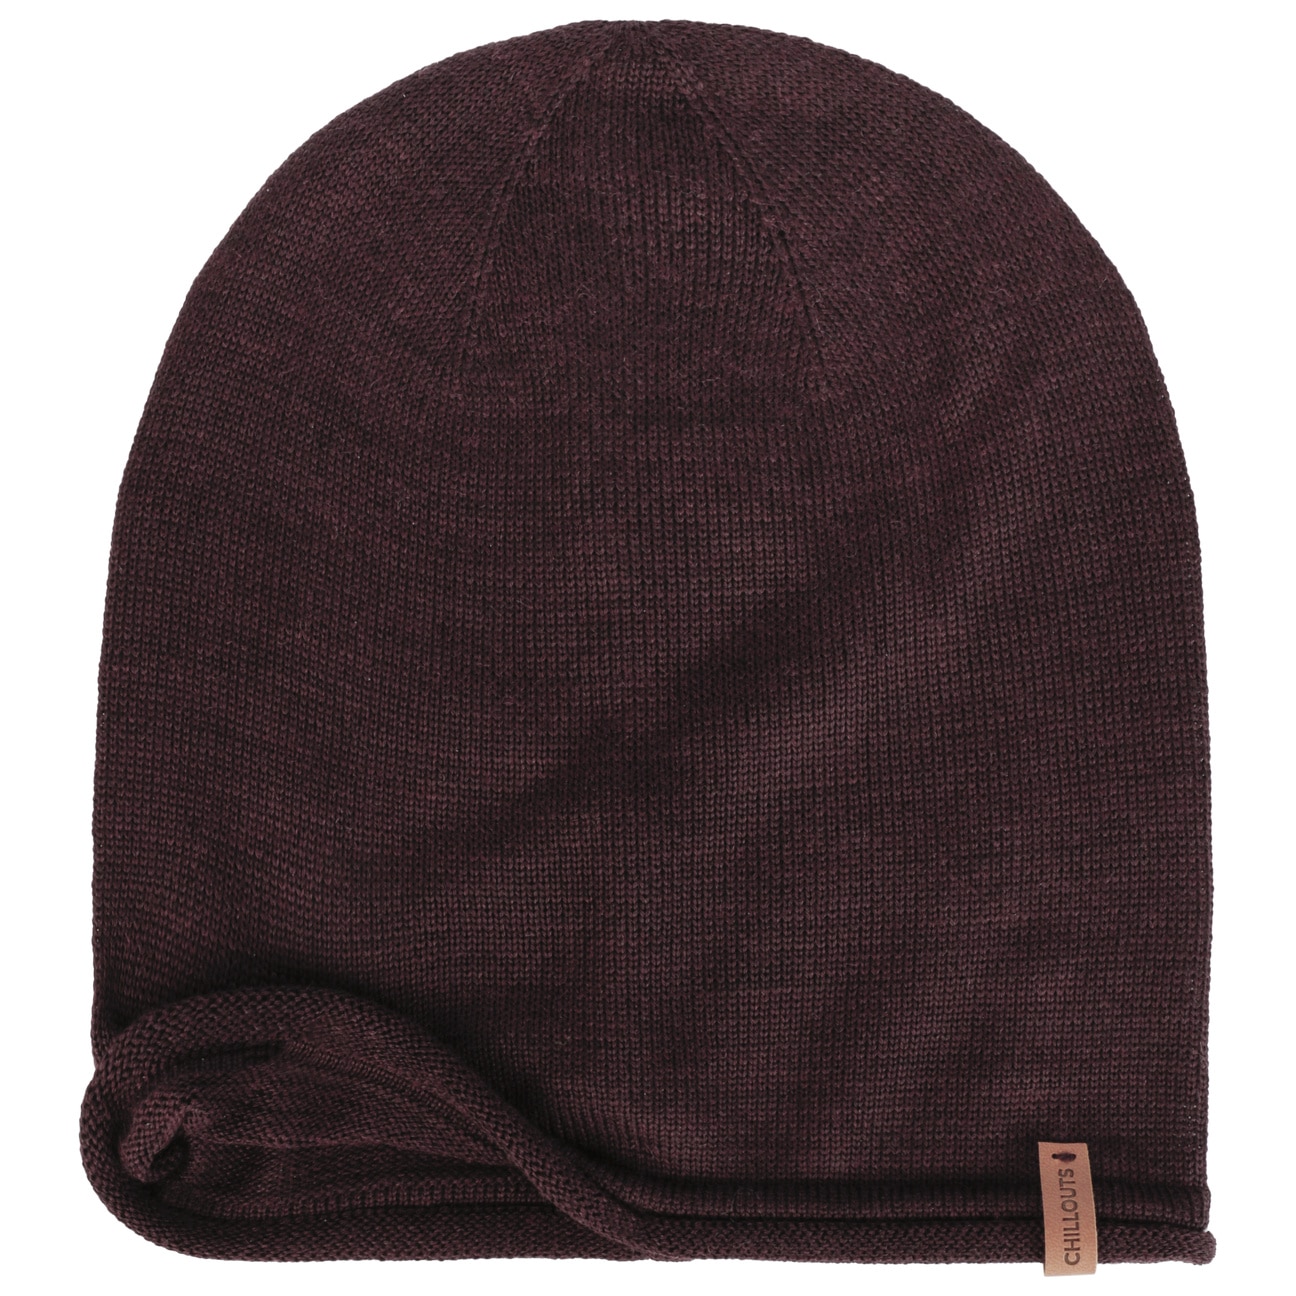 by 27,99 Beanie € Chillouts - Leicester Berretto